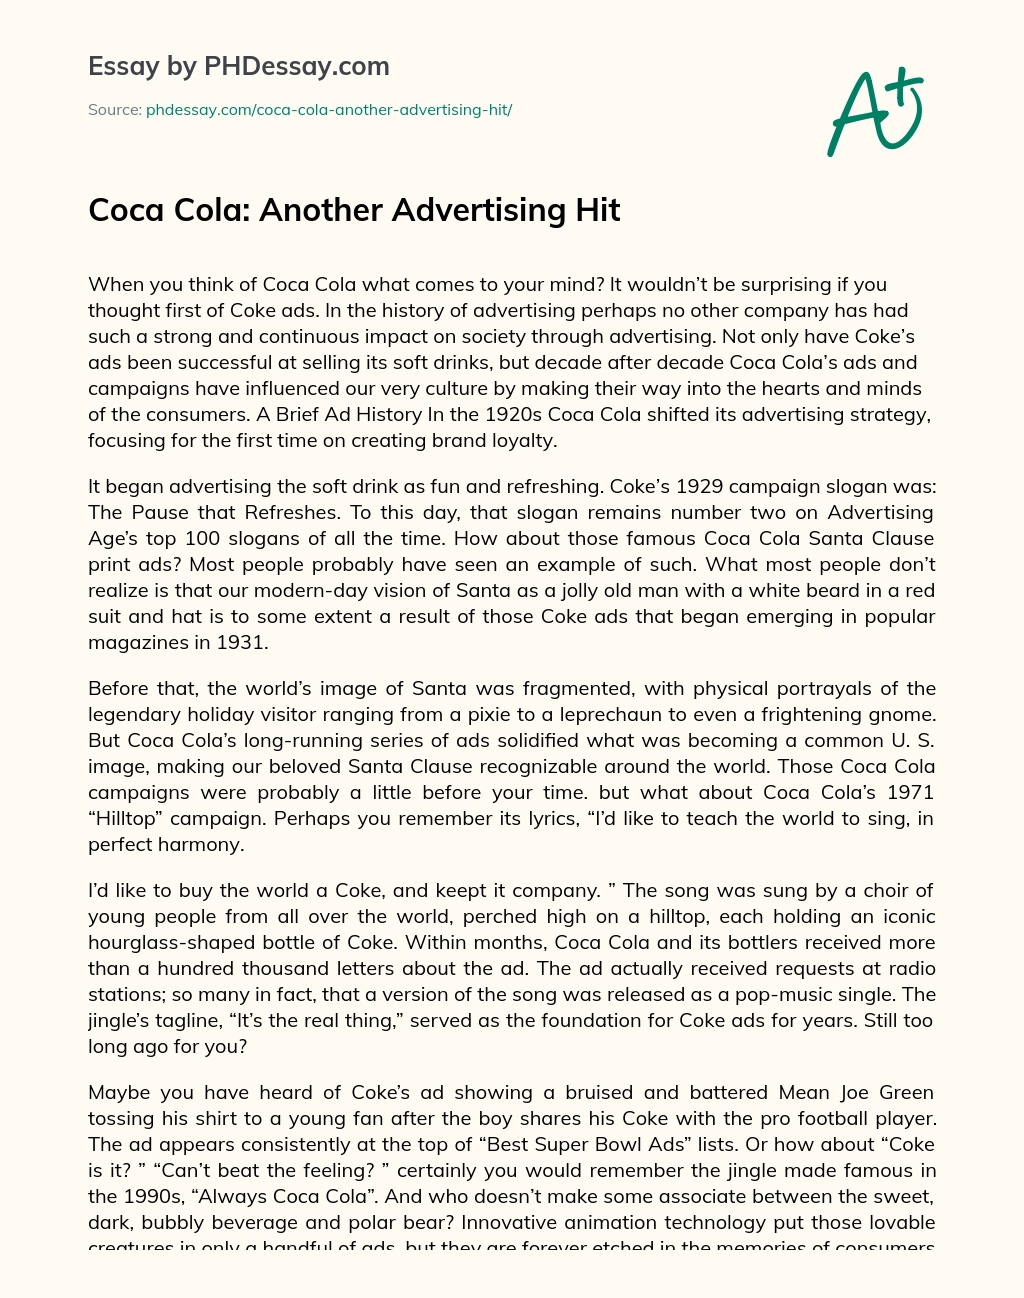 Coca Cola: Another Advertising Hit essay